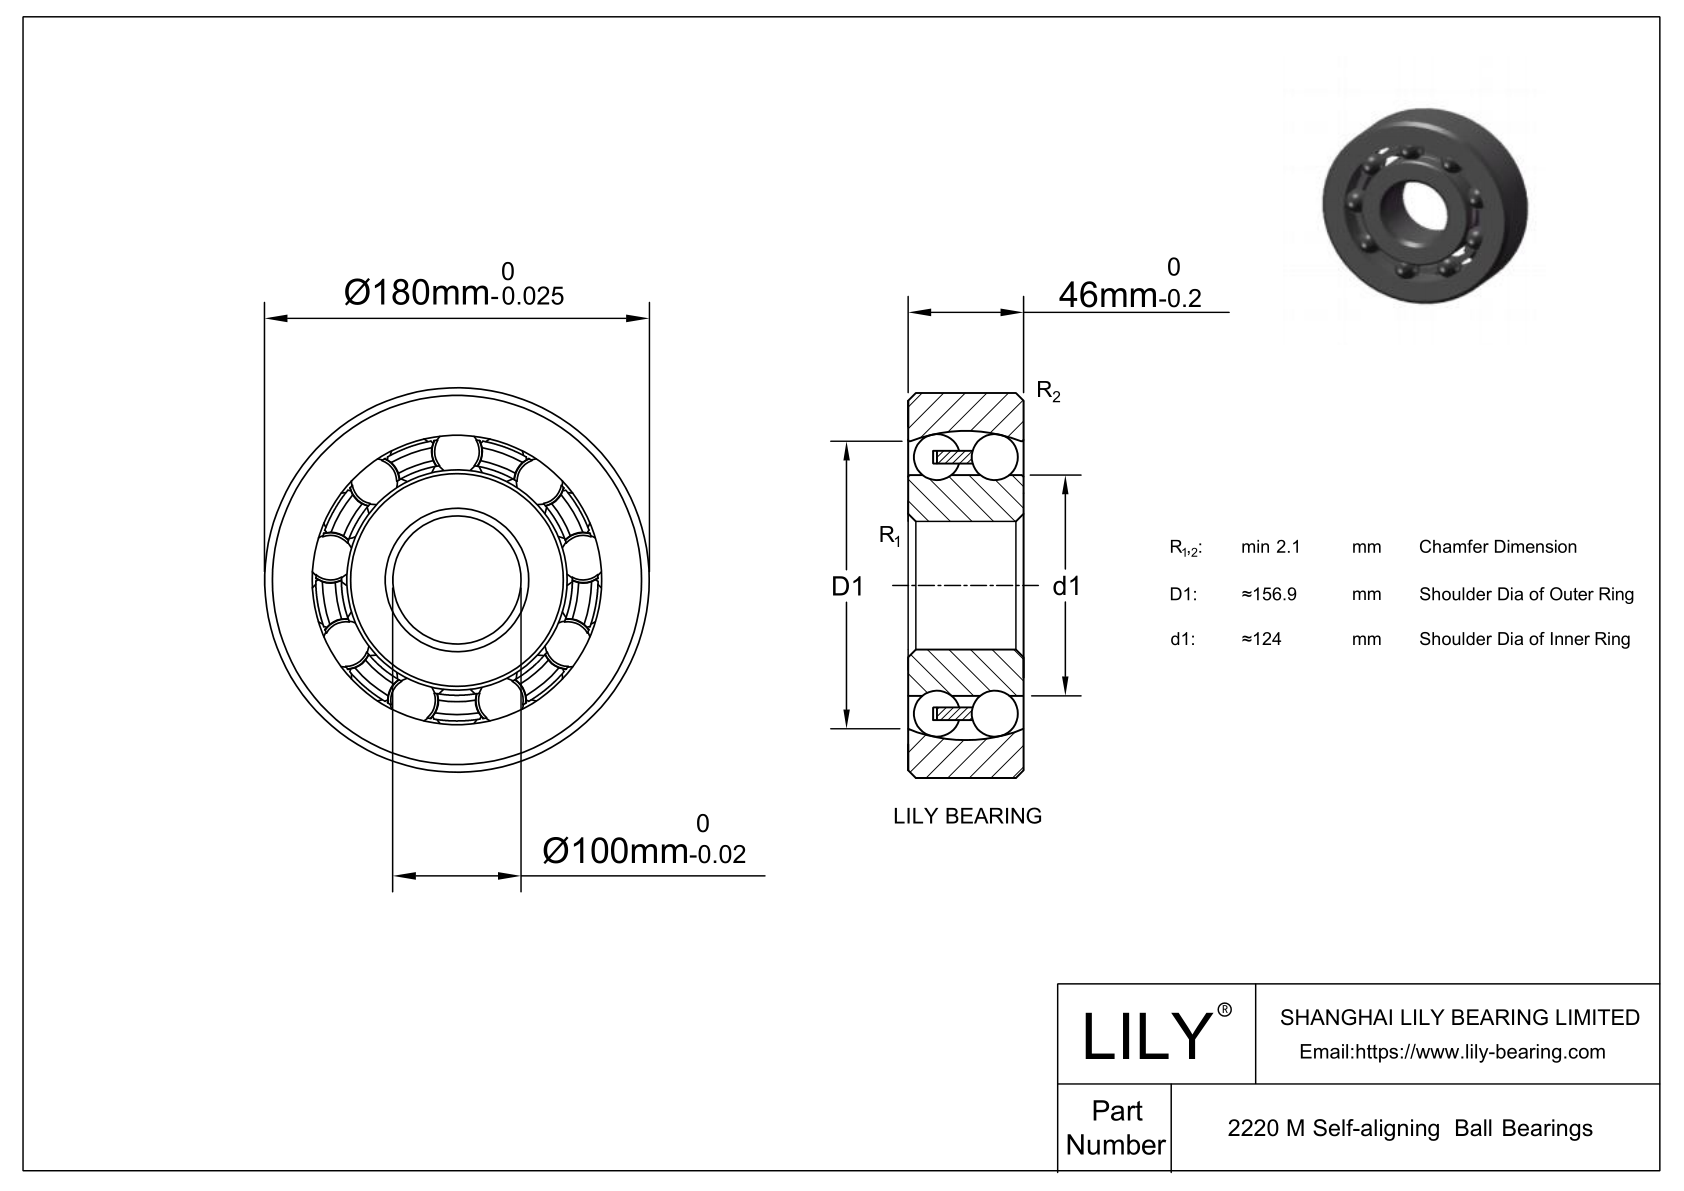 S2220 M Stainless Steel Self Aligning Ball Bearings cad drawing